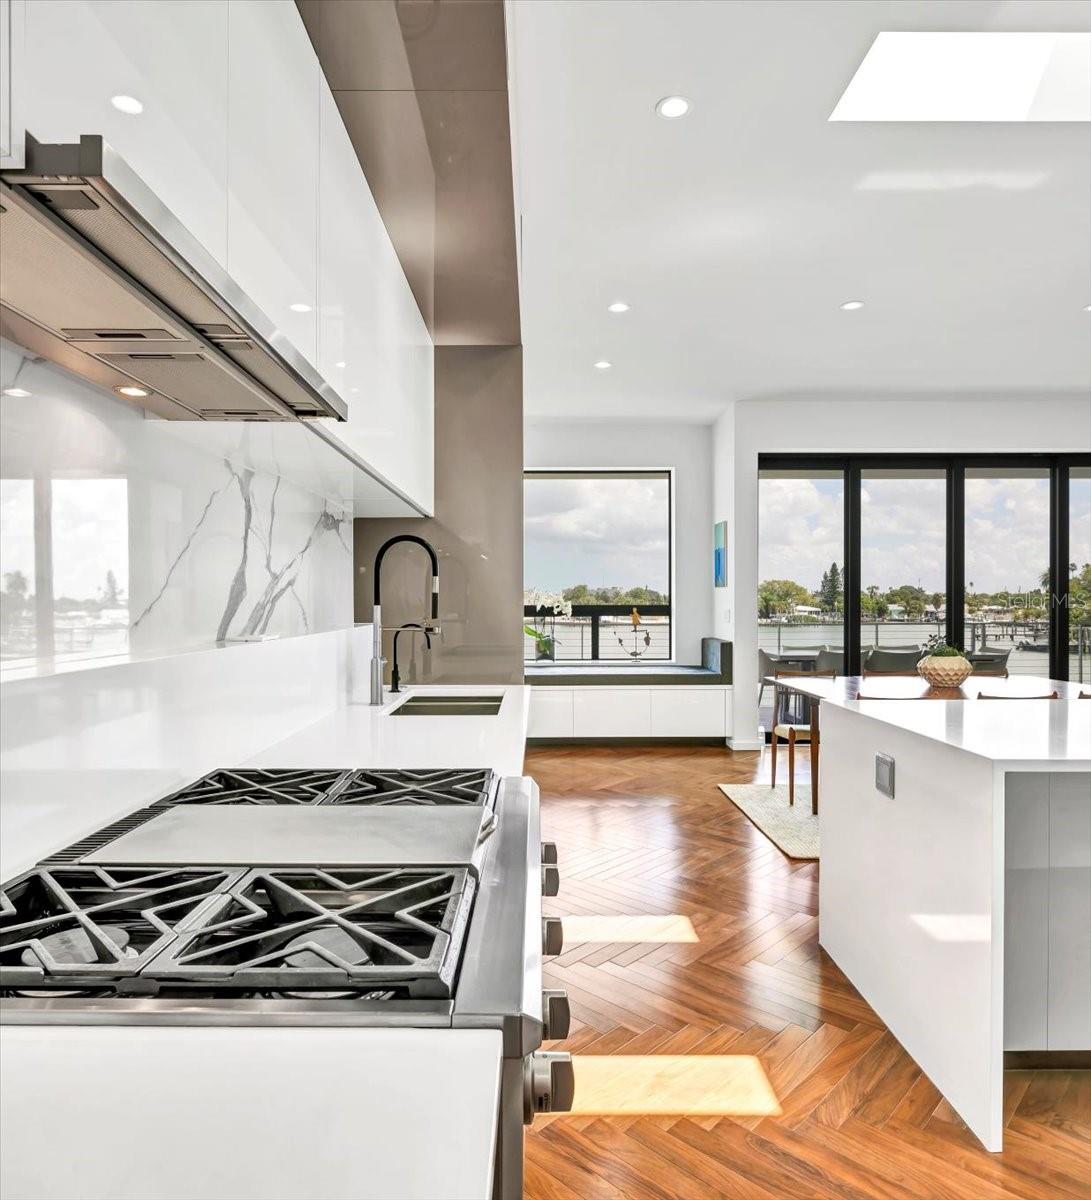 Stunning quartz finishes, gas cooking and an impressive preparation area make this gourmet cooking experience a true joy.